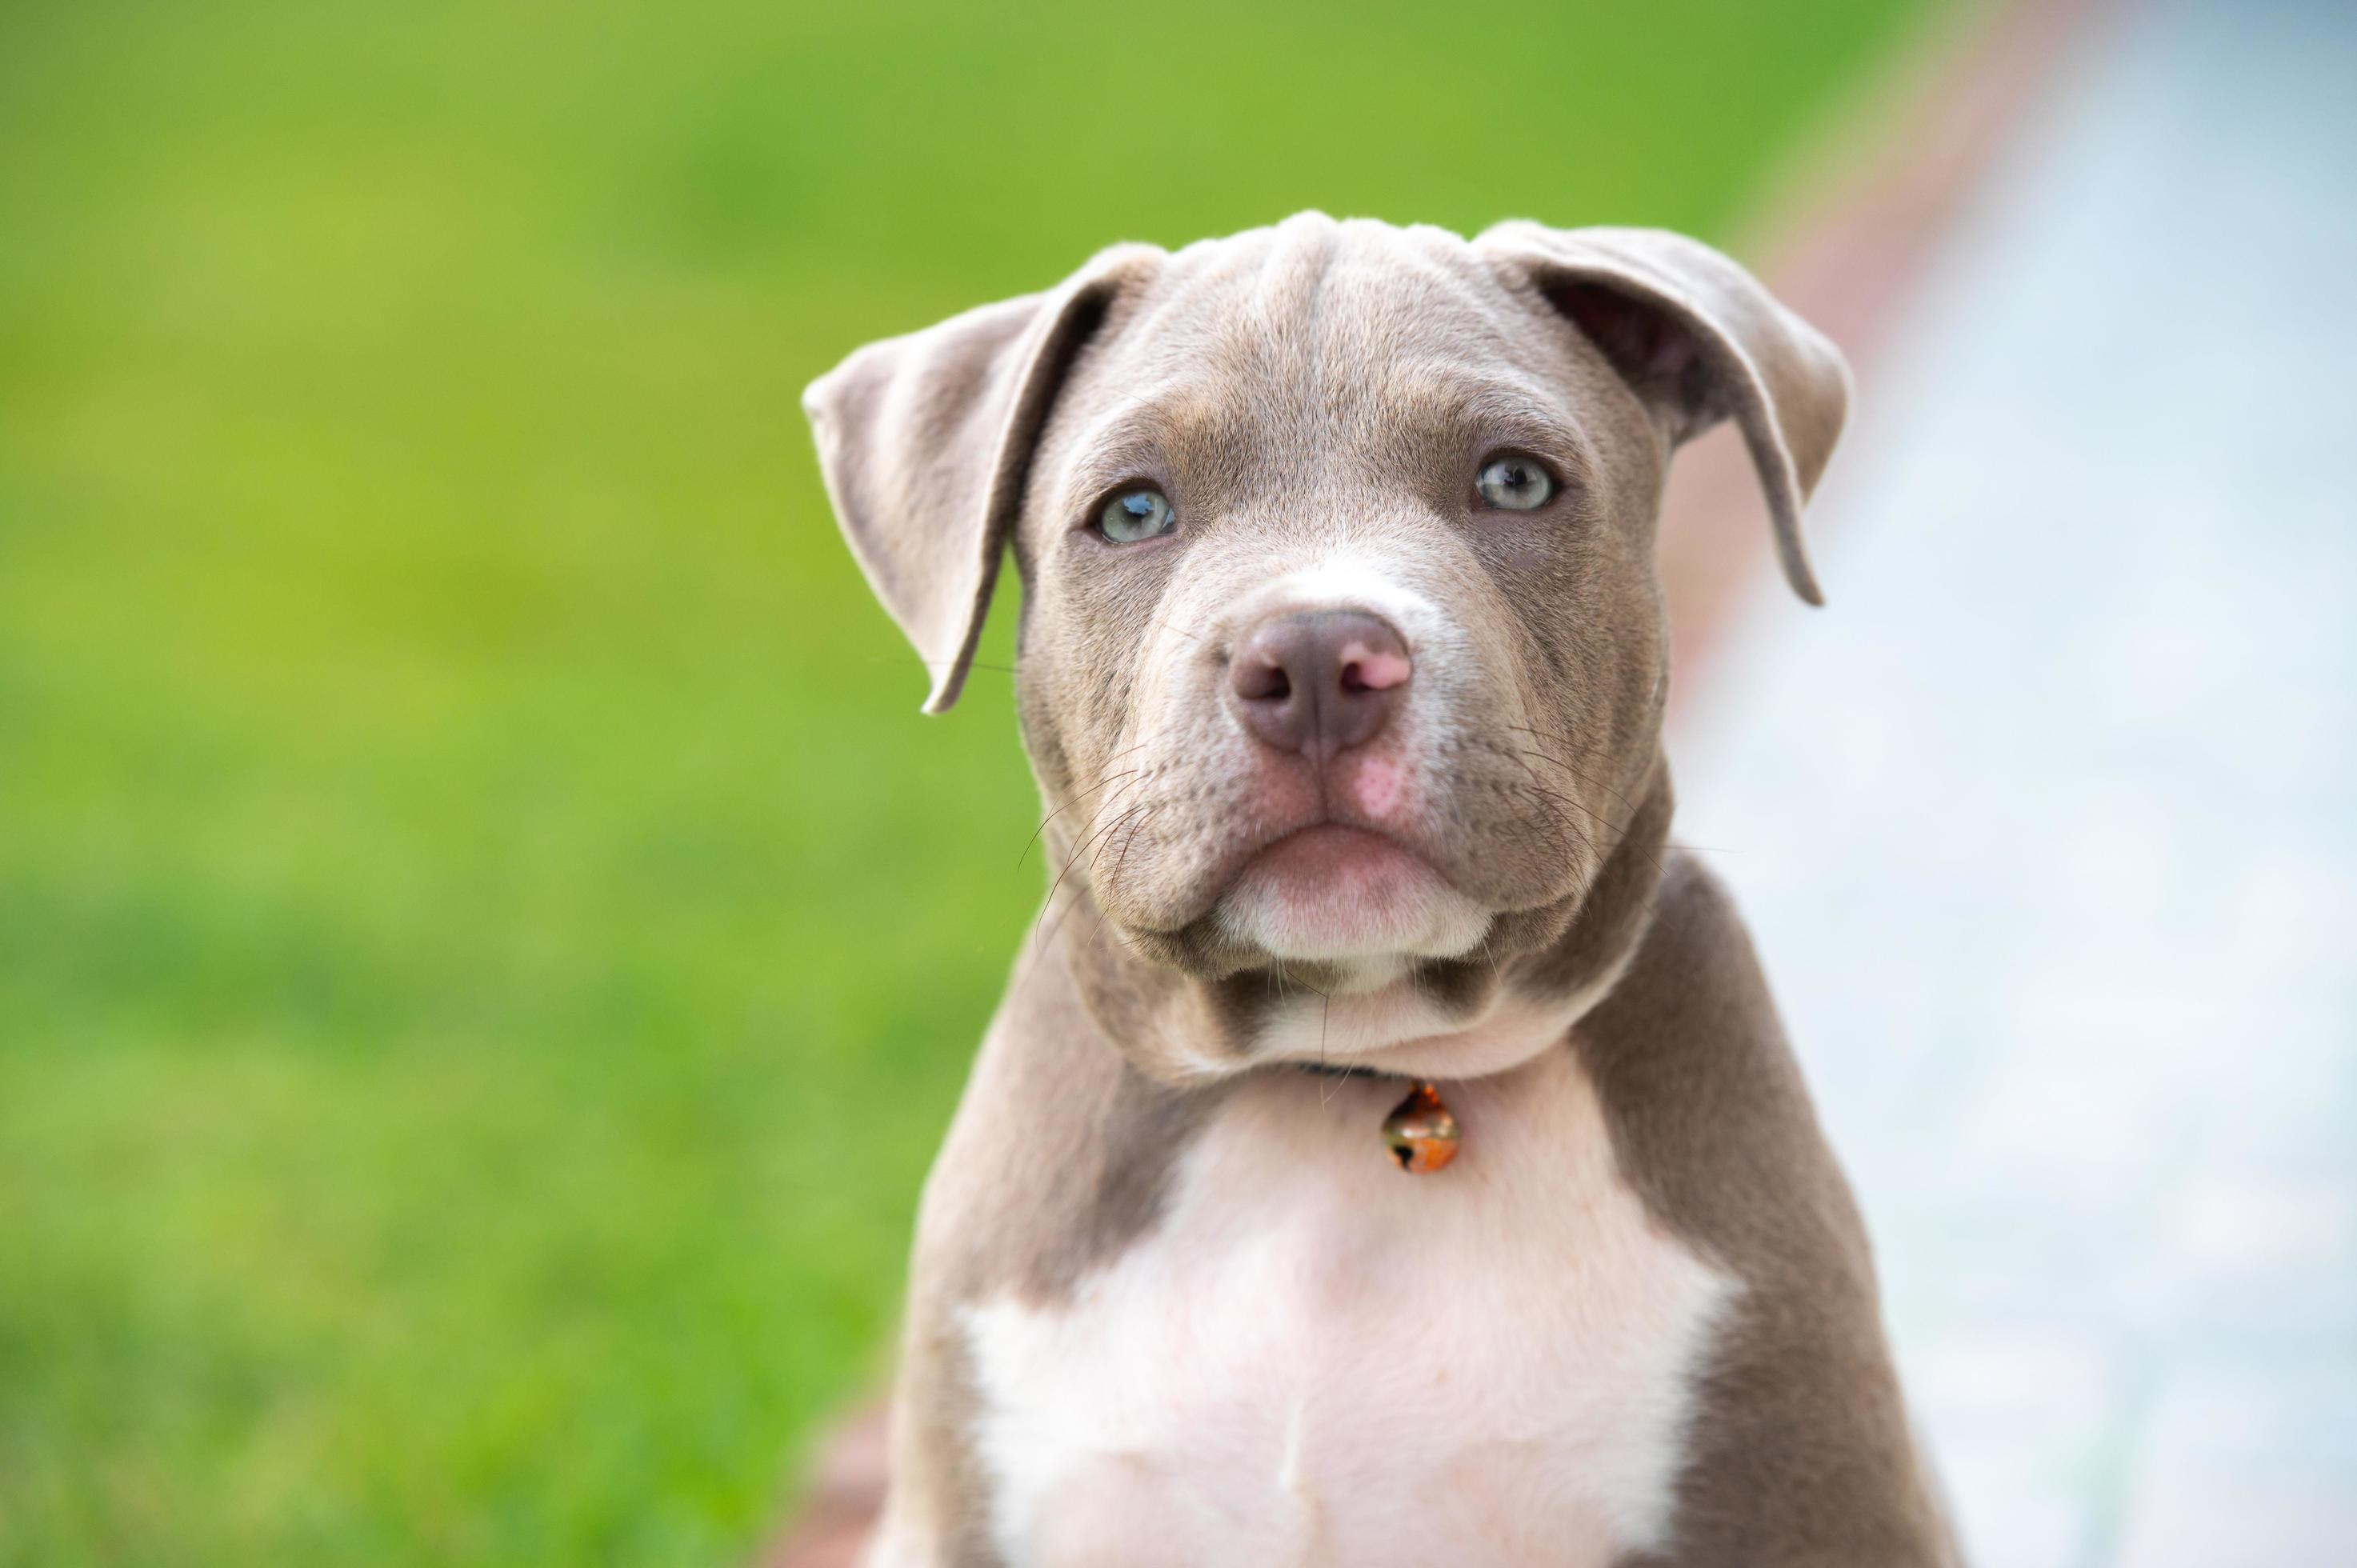 American bully puppy dog, Pet funny and Cute 4408609 Stock Photo at Vecteezy